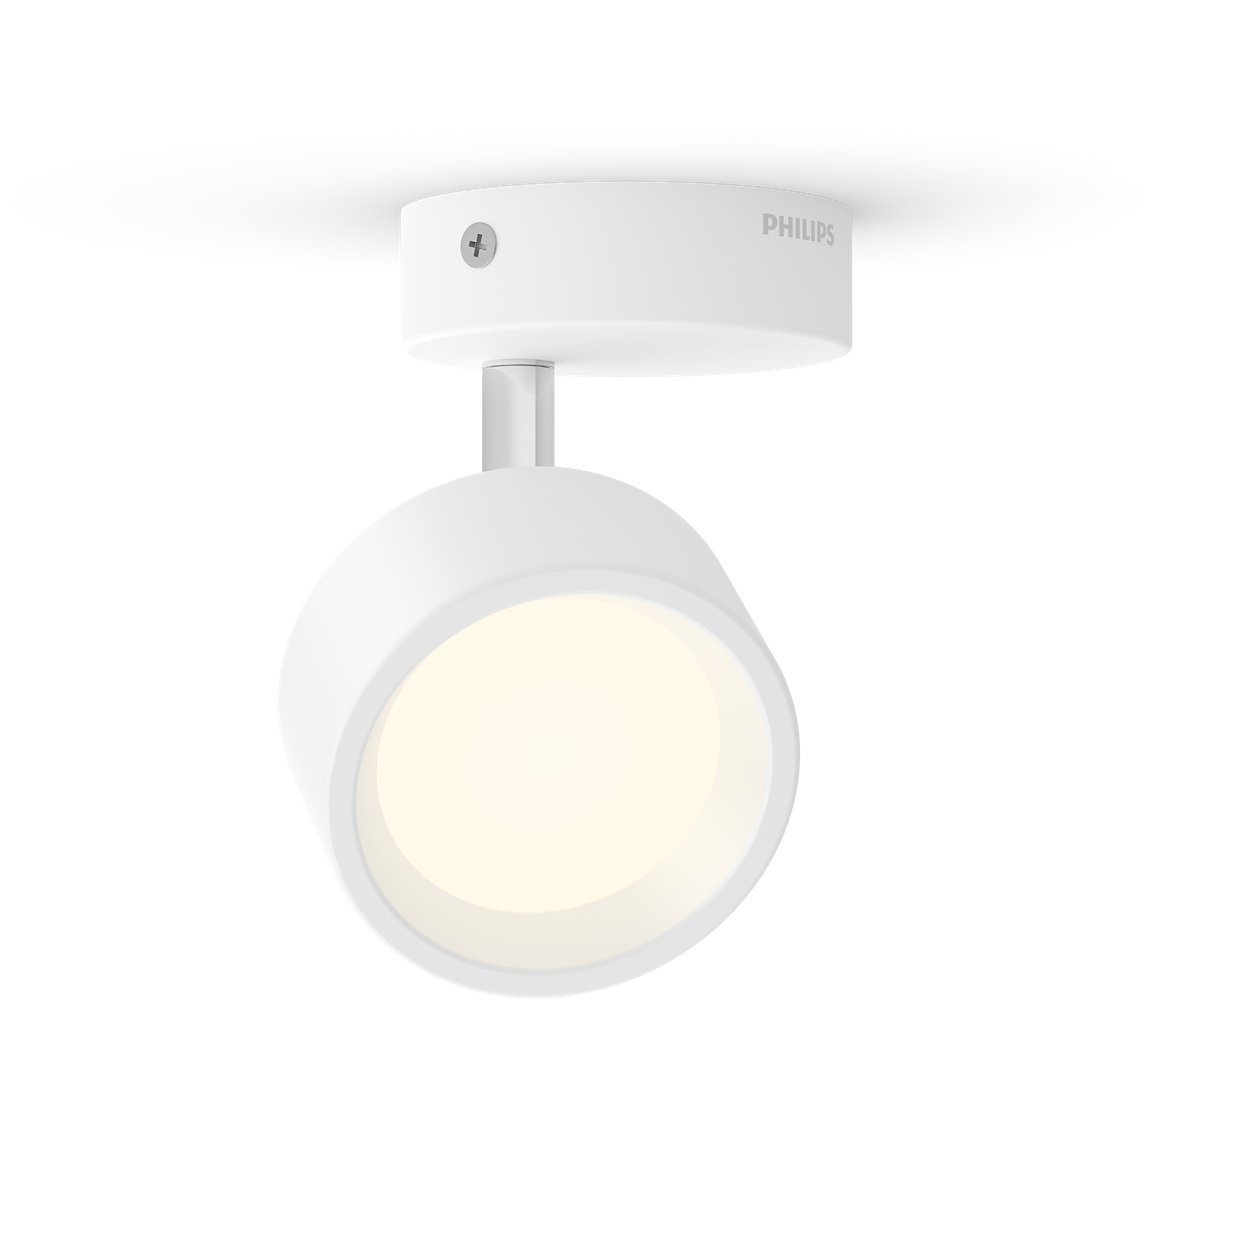 Stylish LED spotlights to brightly illuminate any room in your home